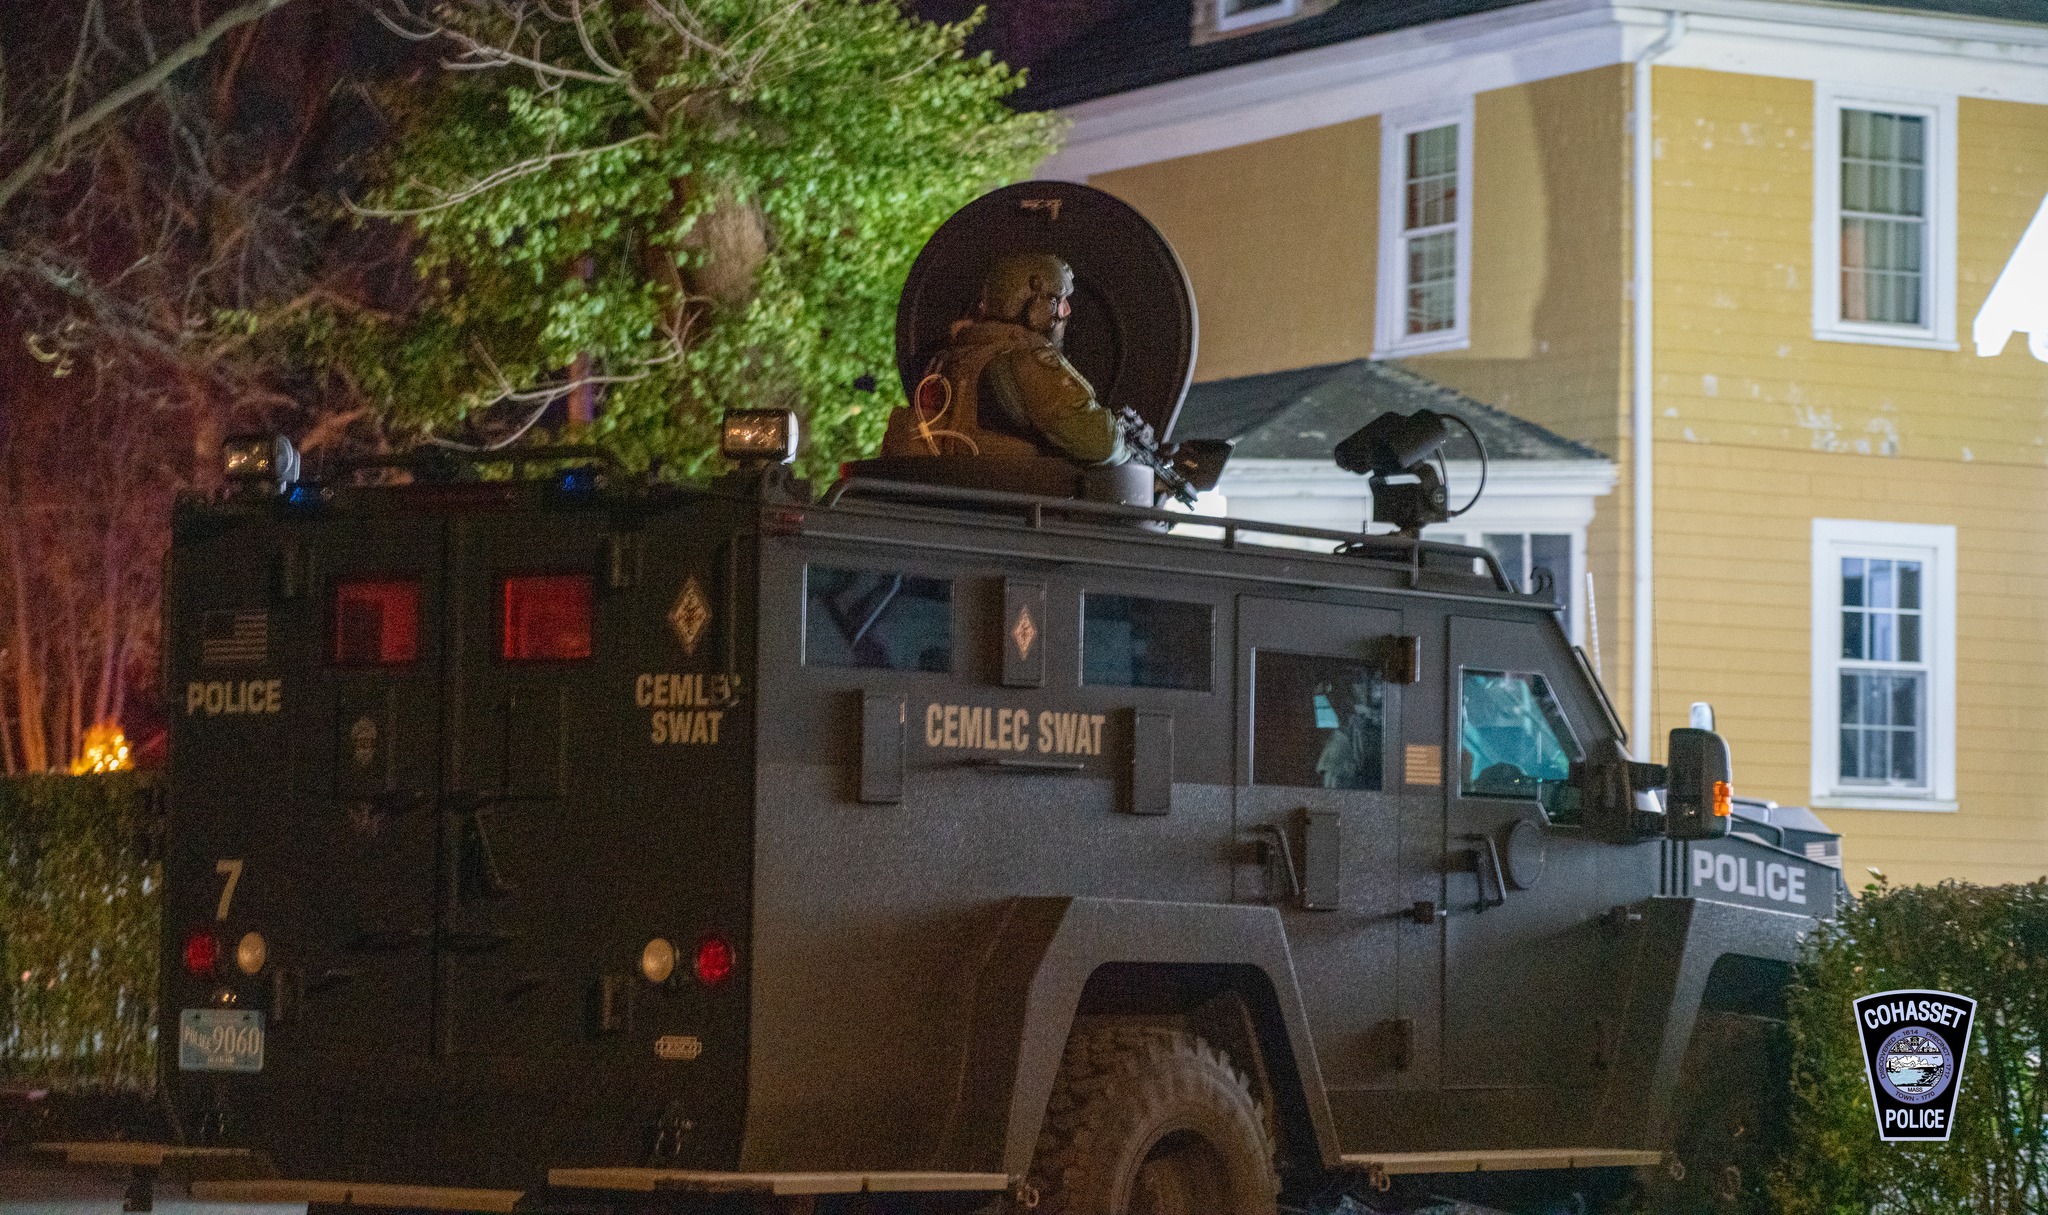 PHOTO: A police tactical vehicle sits on a street in Cohasset, Massachusetts, in a photo supplied on Dec. 18 by the Cohasset Police Department.